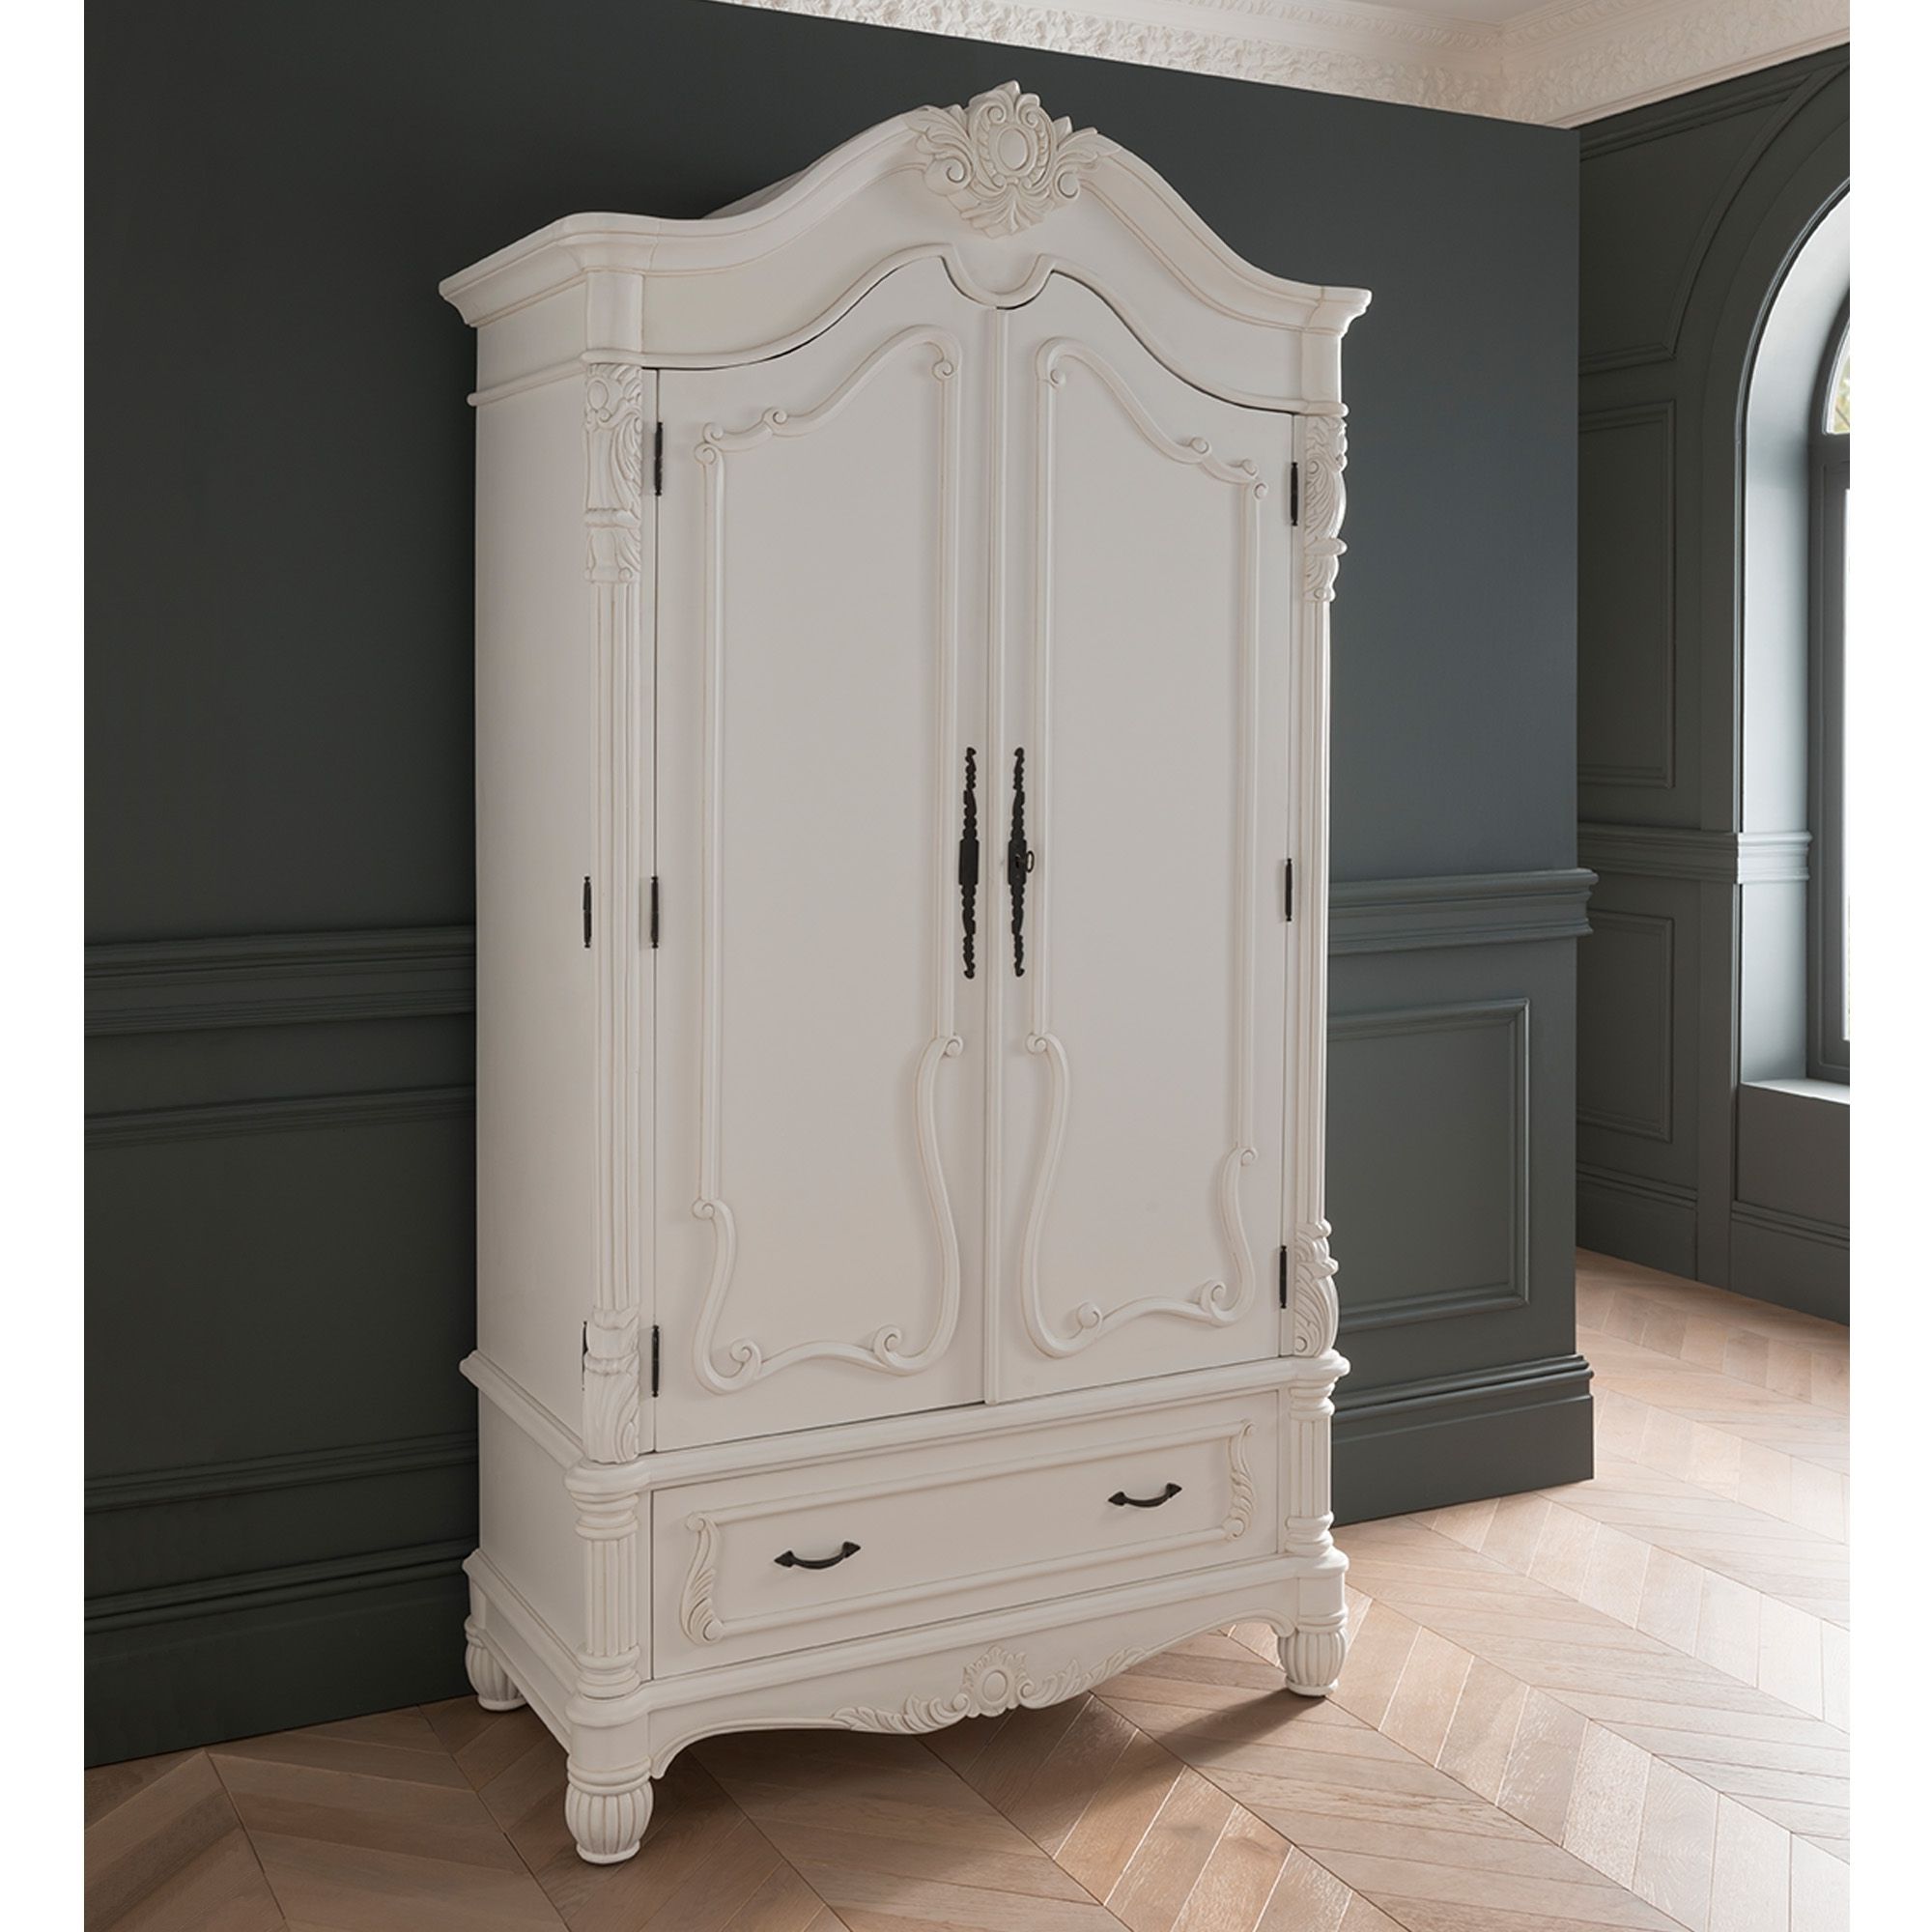 Antique French Style White Finished 1 Drawer Wardrobe | Homesdirect365 In French Wardrobes (View 17 of 20)